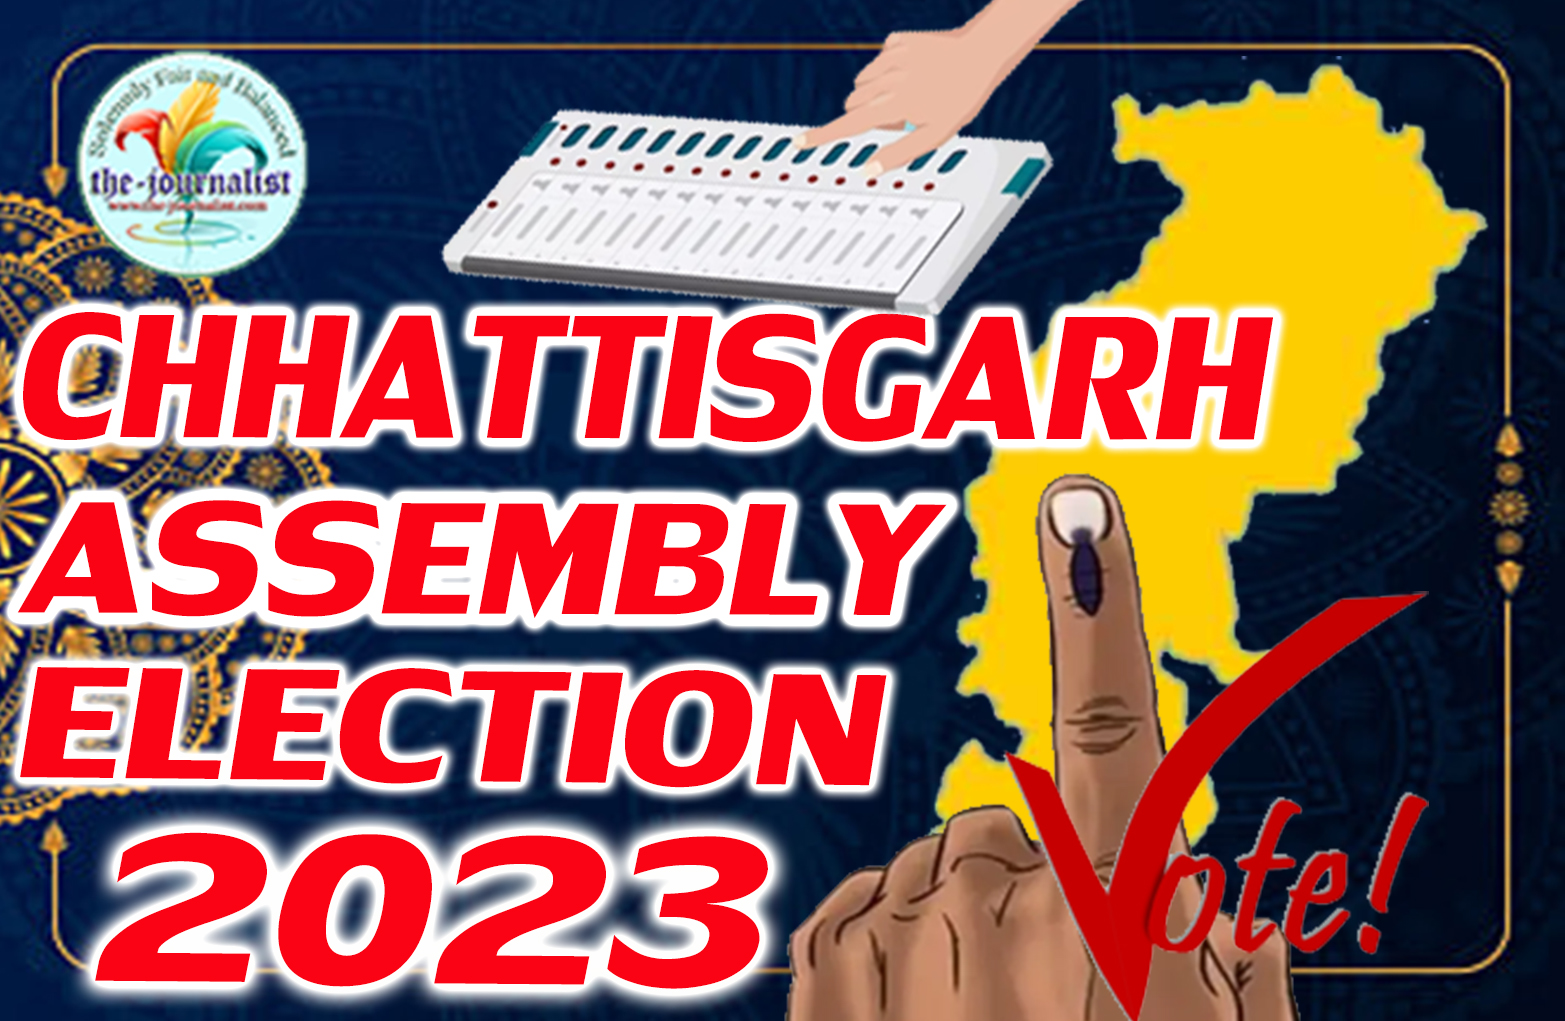 Exclu,sive CG Assembly Election 2023: Final voting ,figures released 76 ...